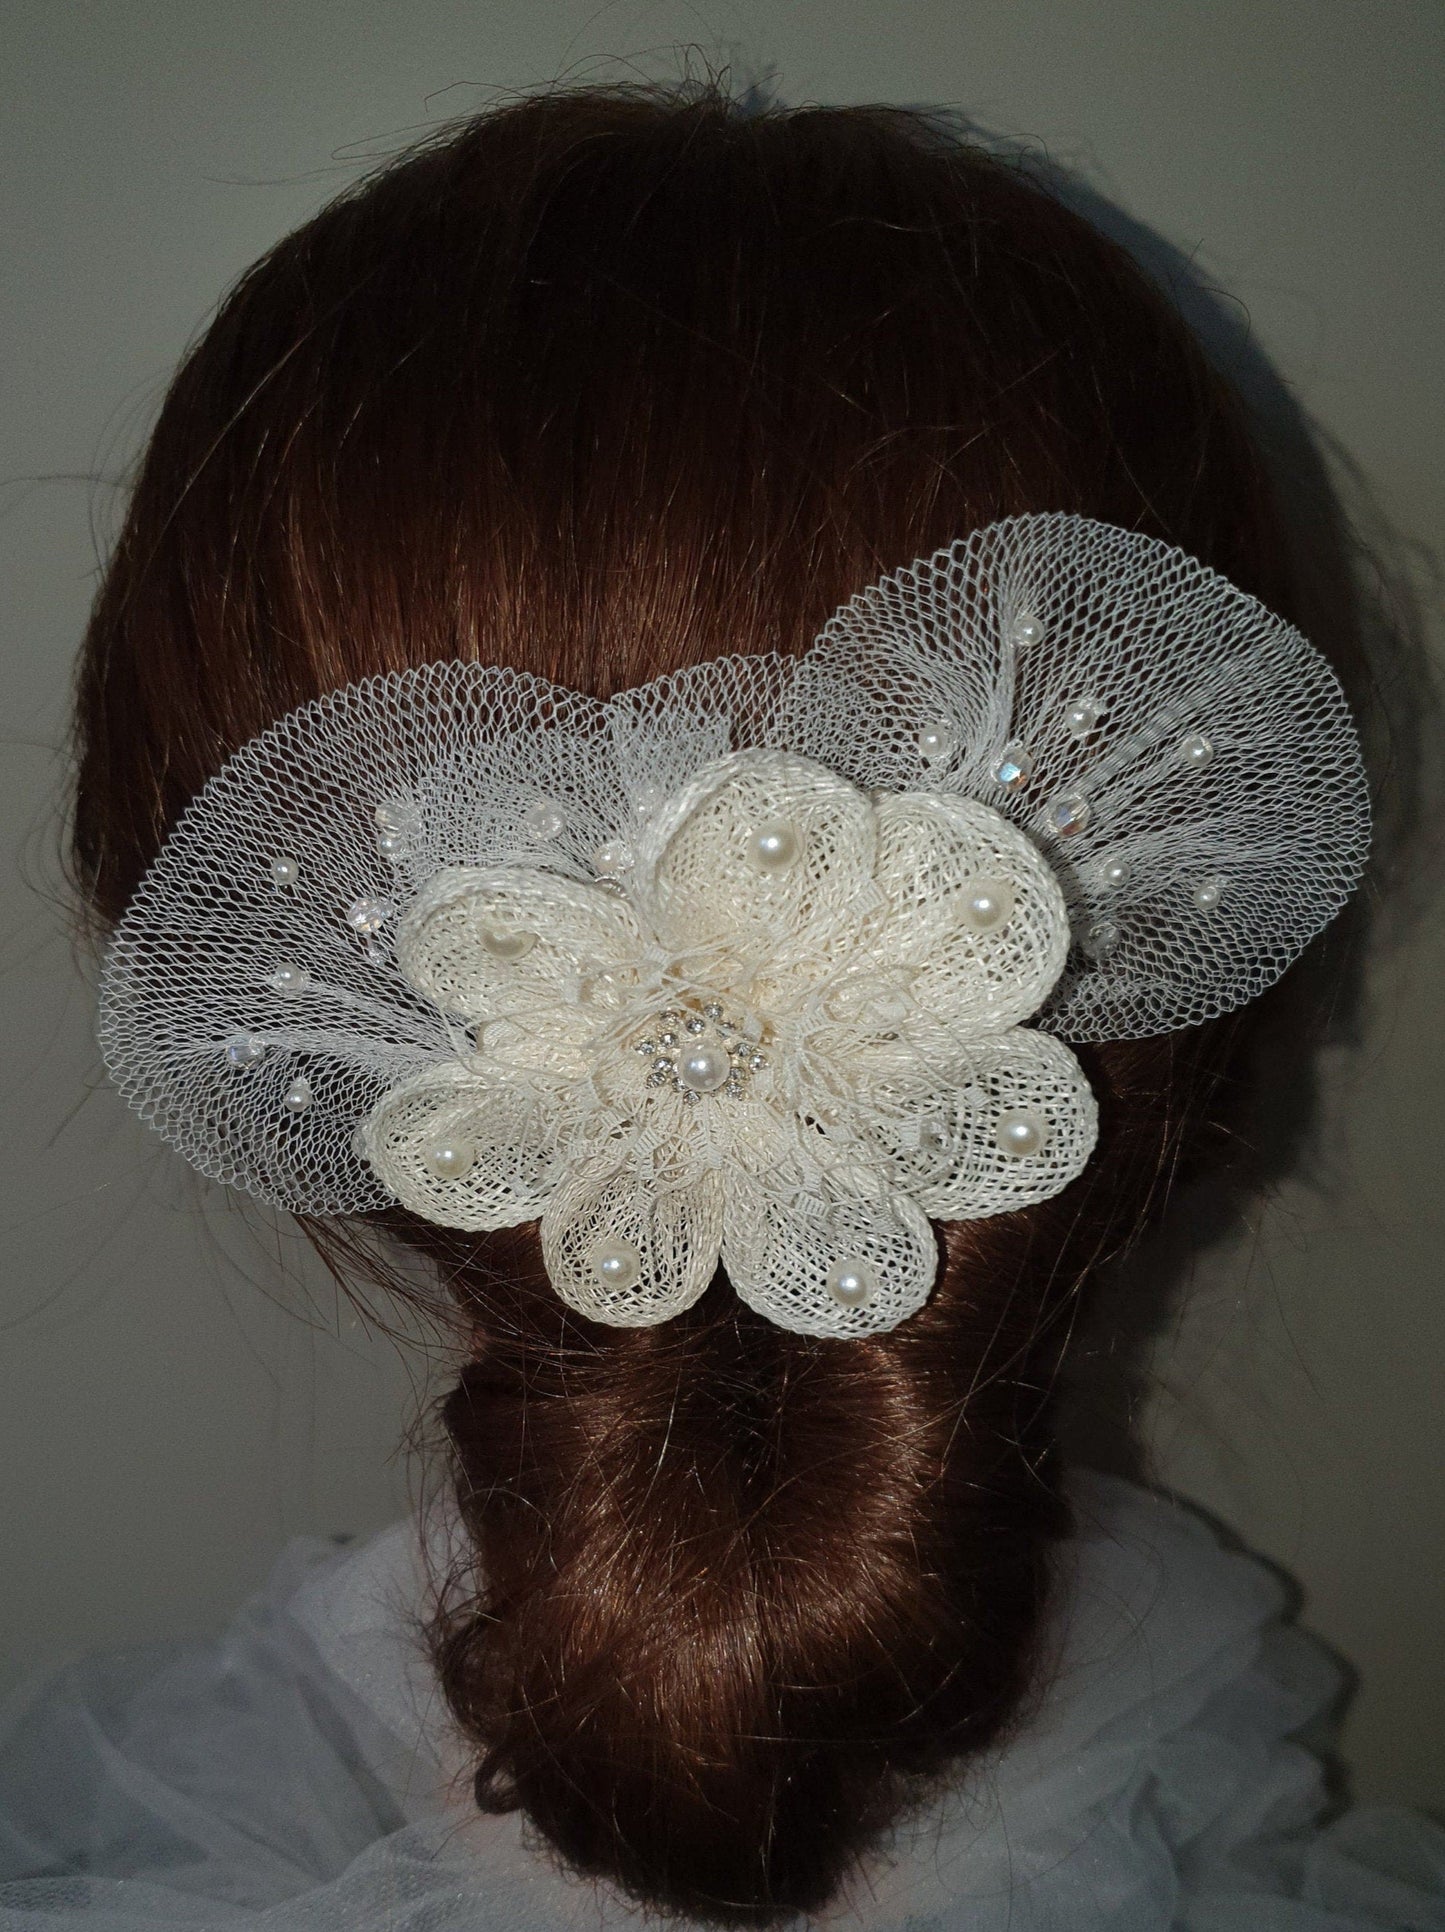 Bridal hair comb with sinamay flower, handmade with pearls, seed beads, elegant hair accessory, wedding comb, special events